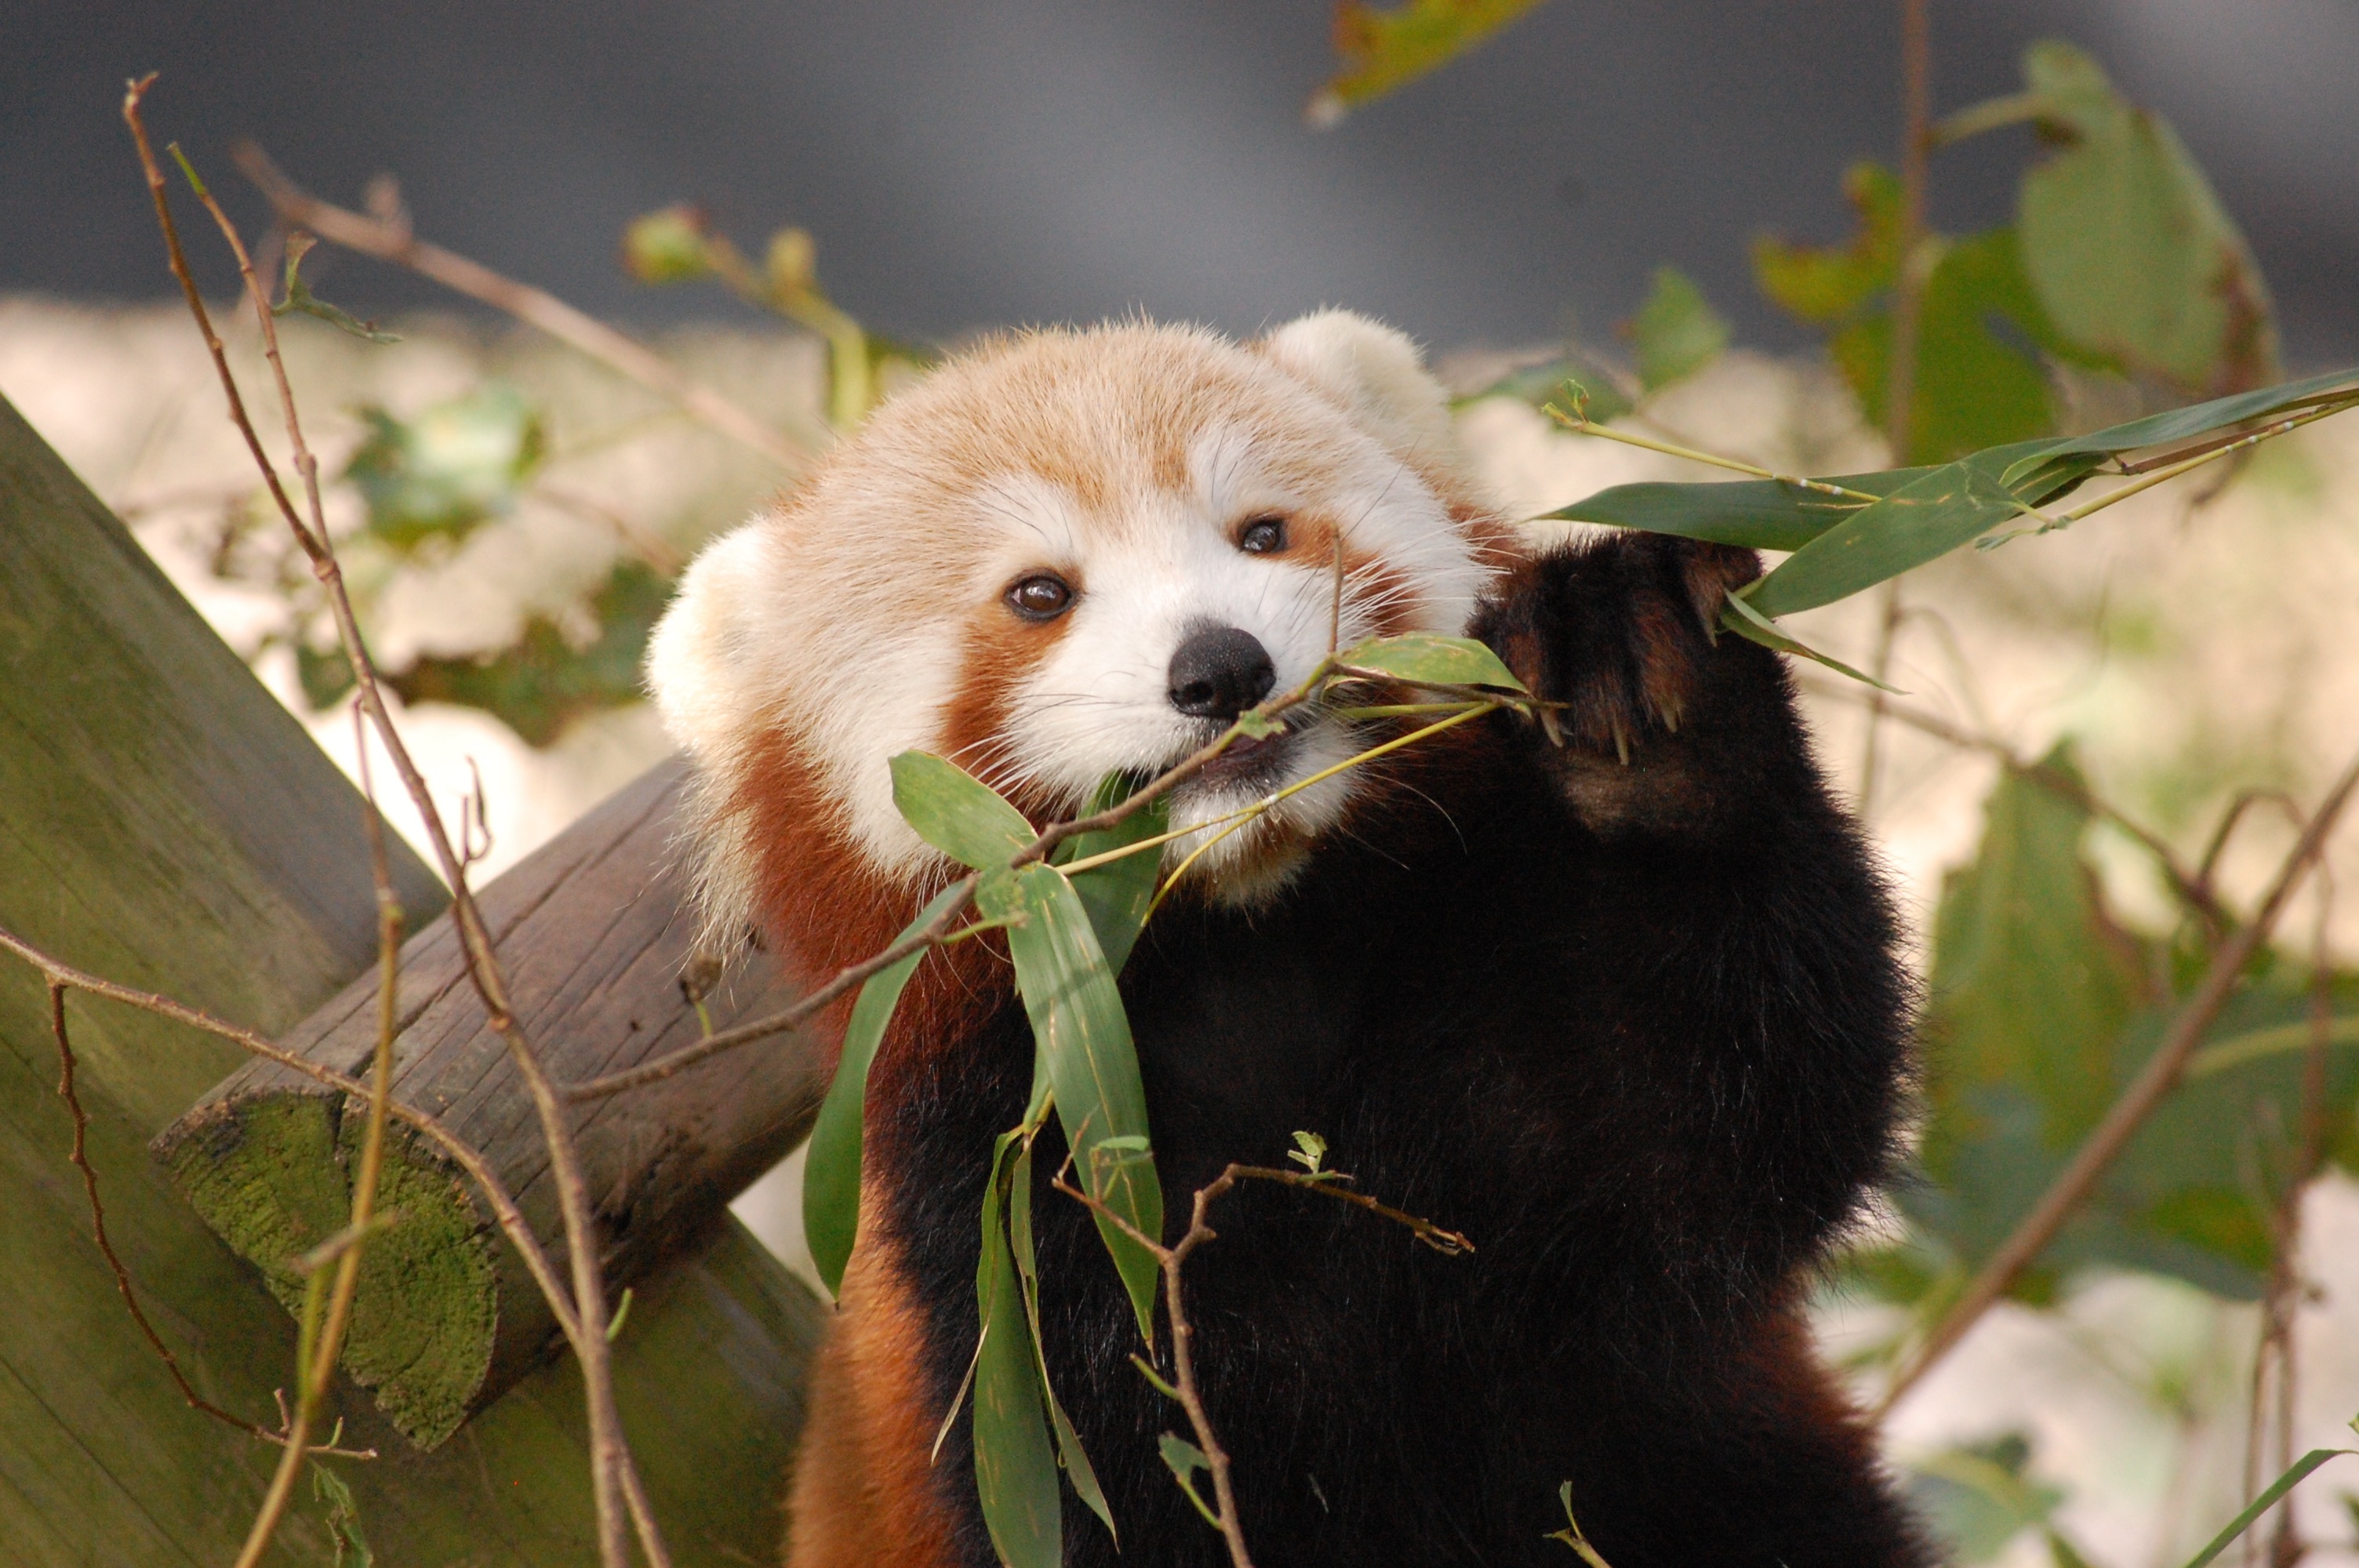 Virginia Zoo: Search for missing Red Panda Sunny - Red Pandazine